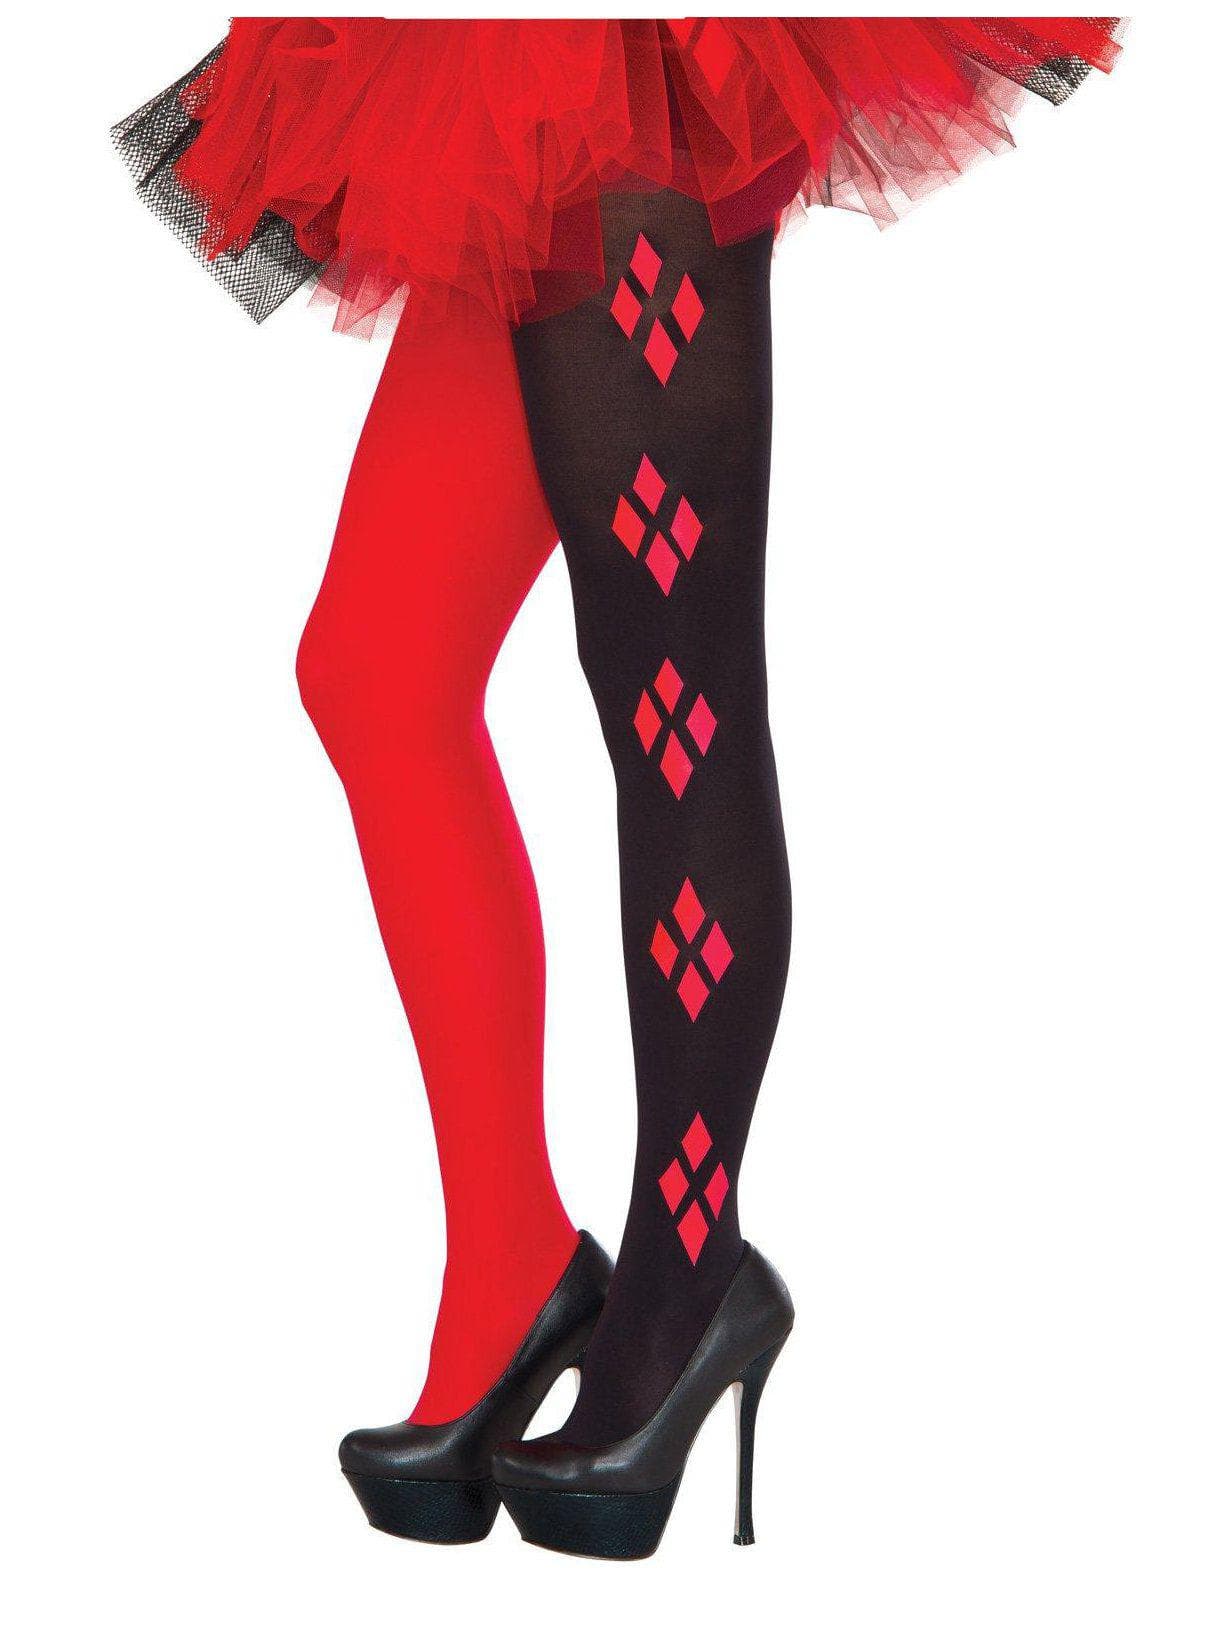 Women's Black and Red DC Comics Harley Quinn Tights - costumes.com